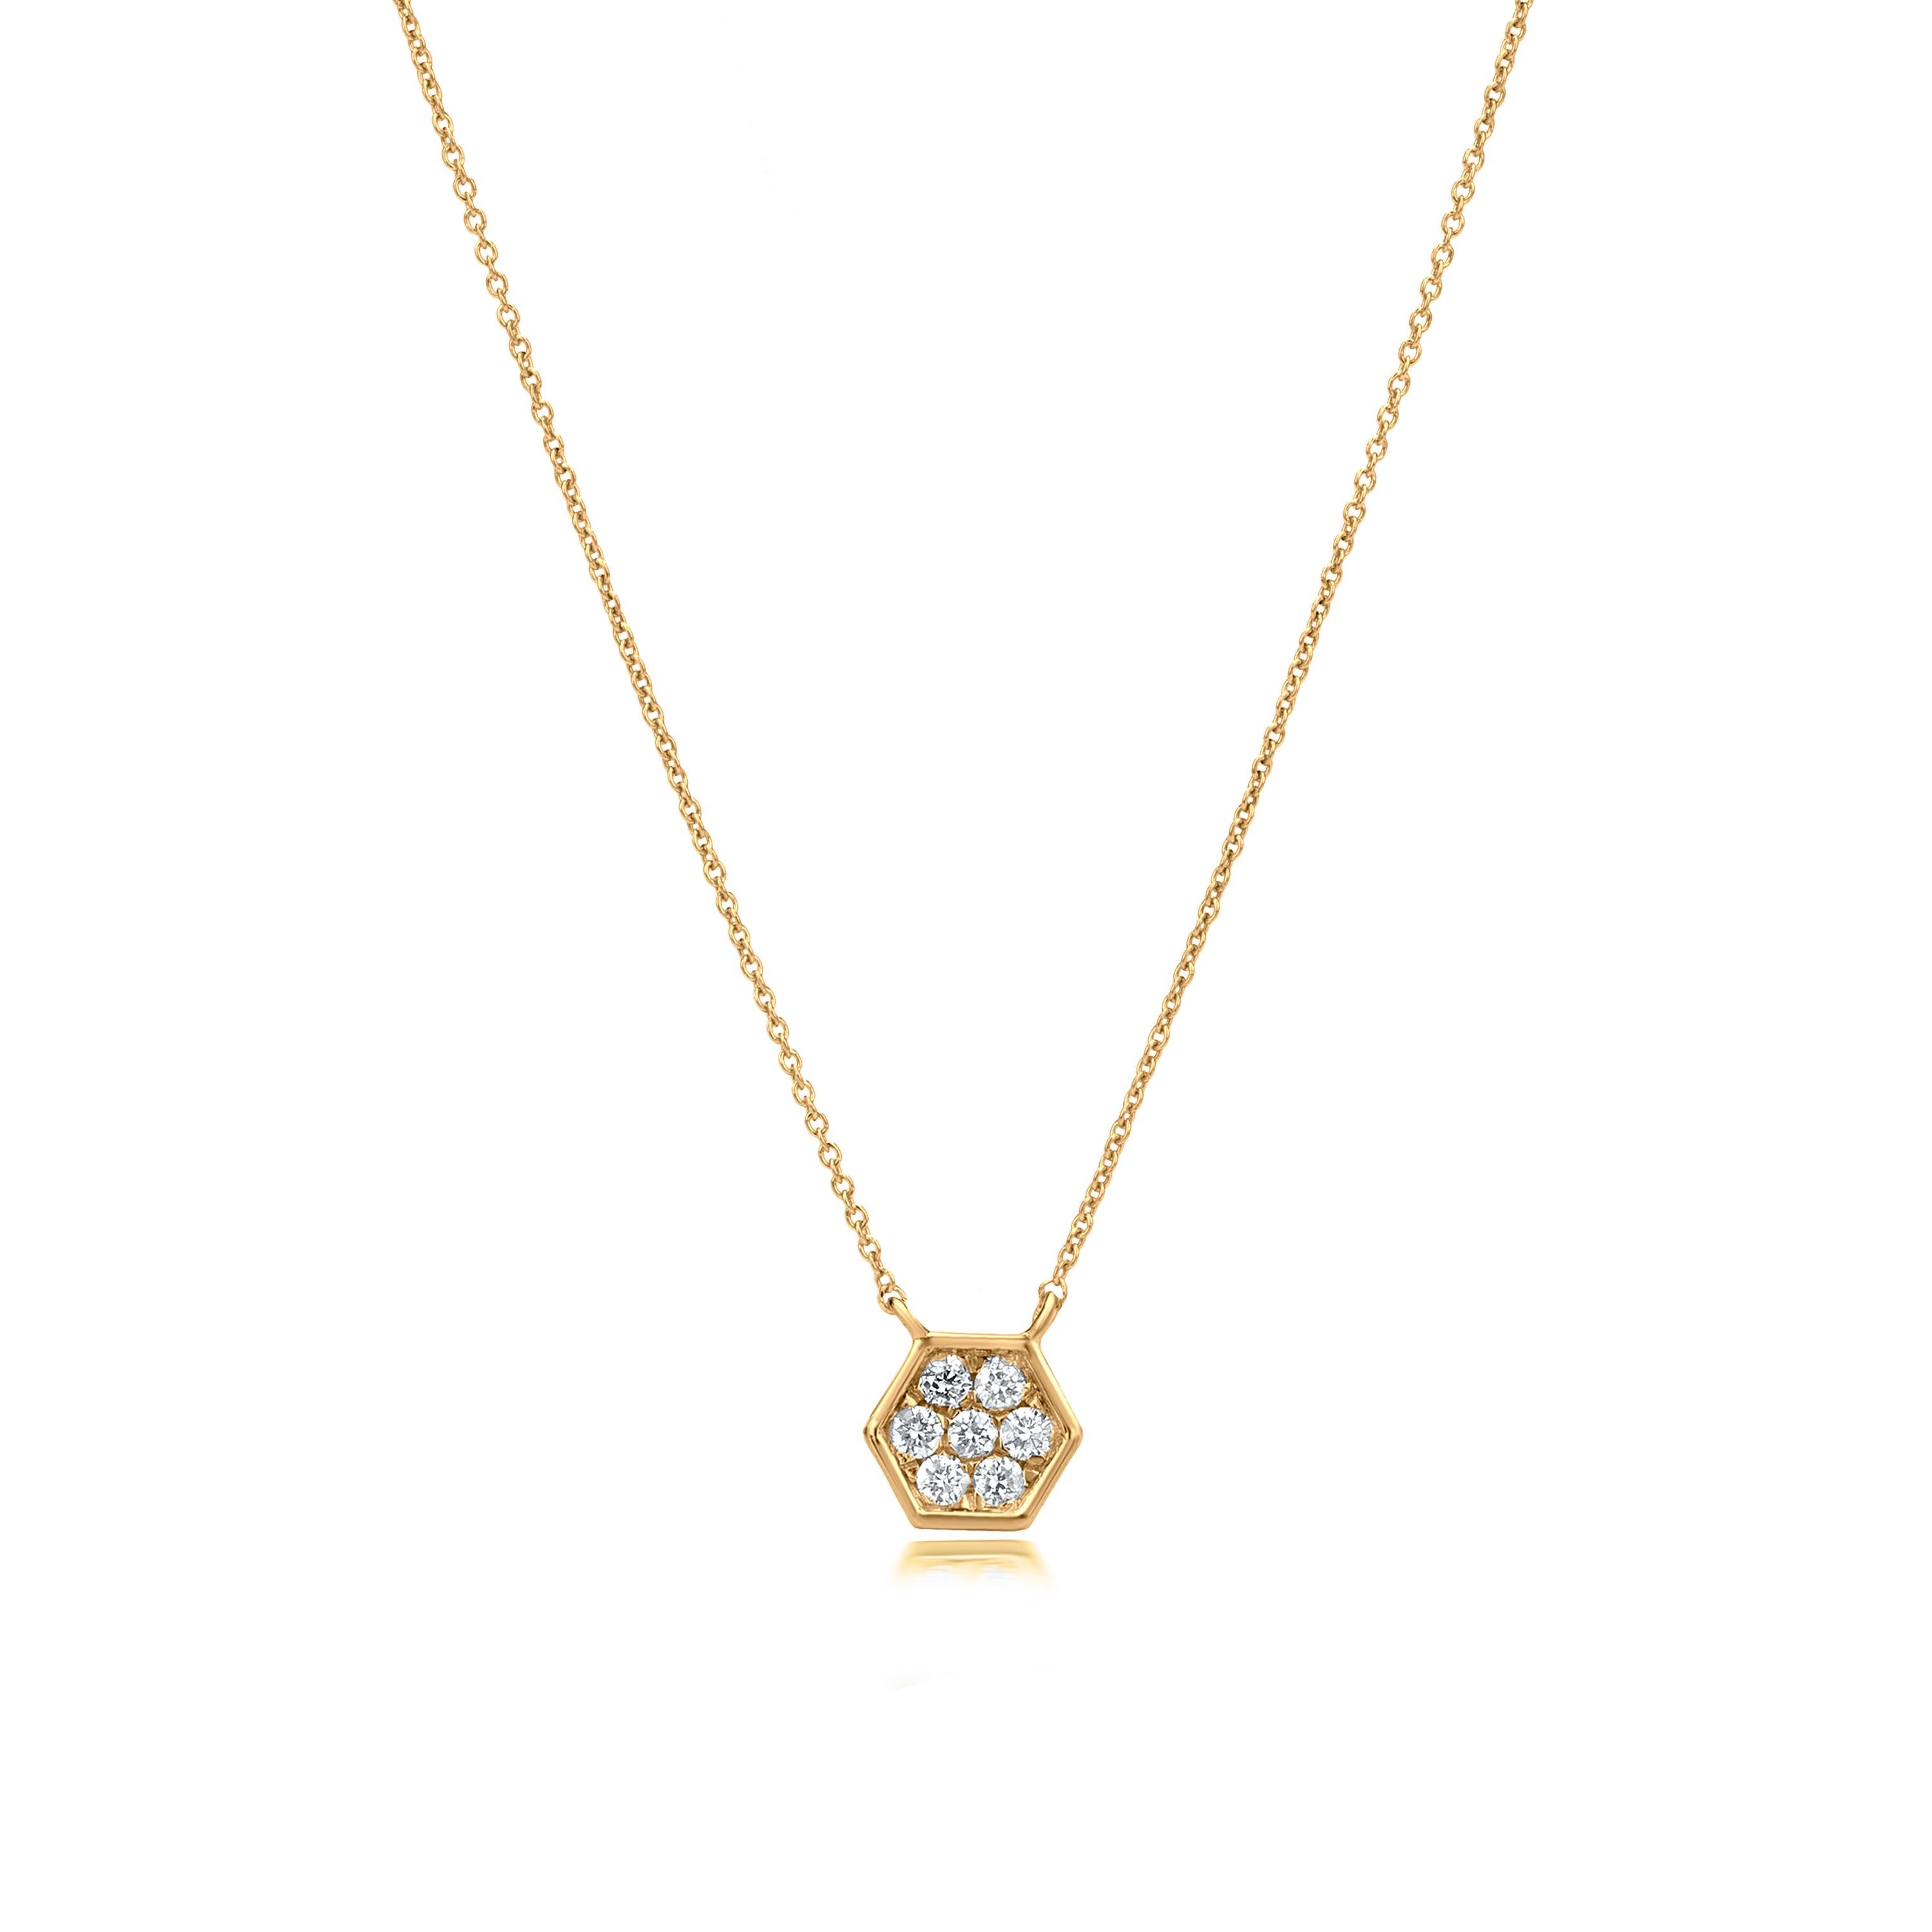 Grace your neckline with a Luxle hexagon pendant a symbol of unity and balance. Subtle yet pretty this hexagonal pendant necklace is the new fashion statement. This gorgeous necklace is featured with 7 round cut diamonds, totaling 0.15Cts pave set